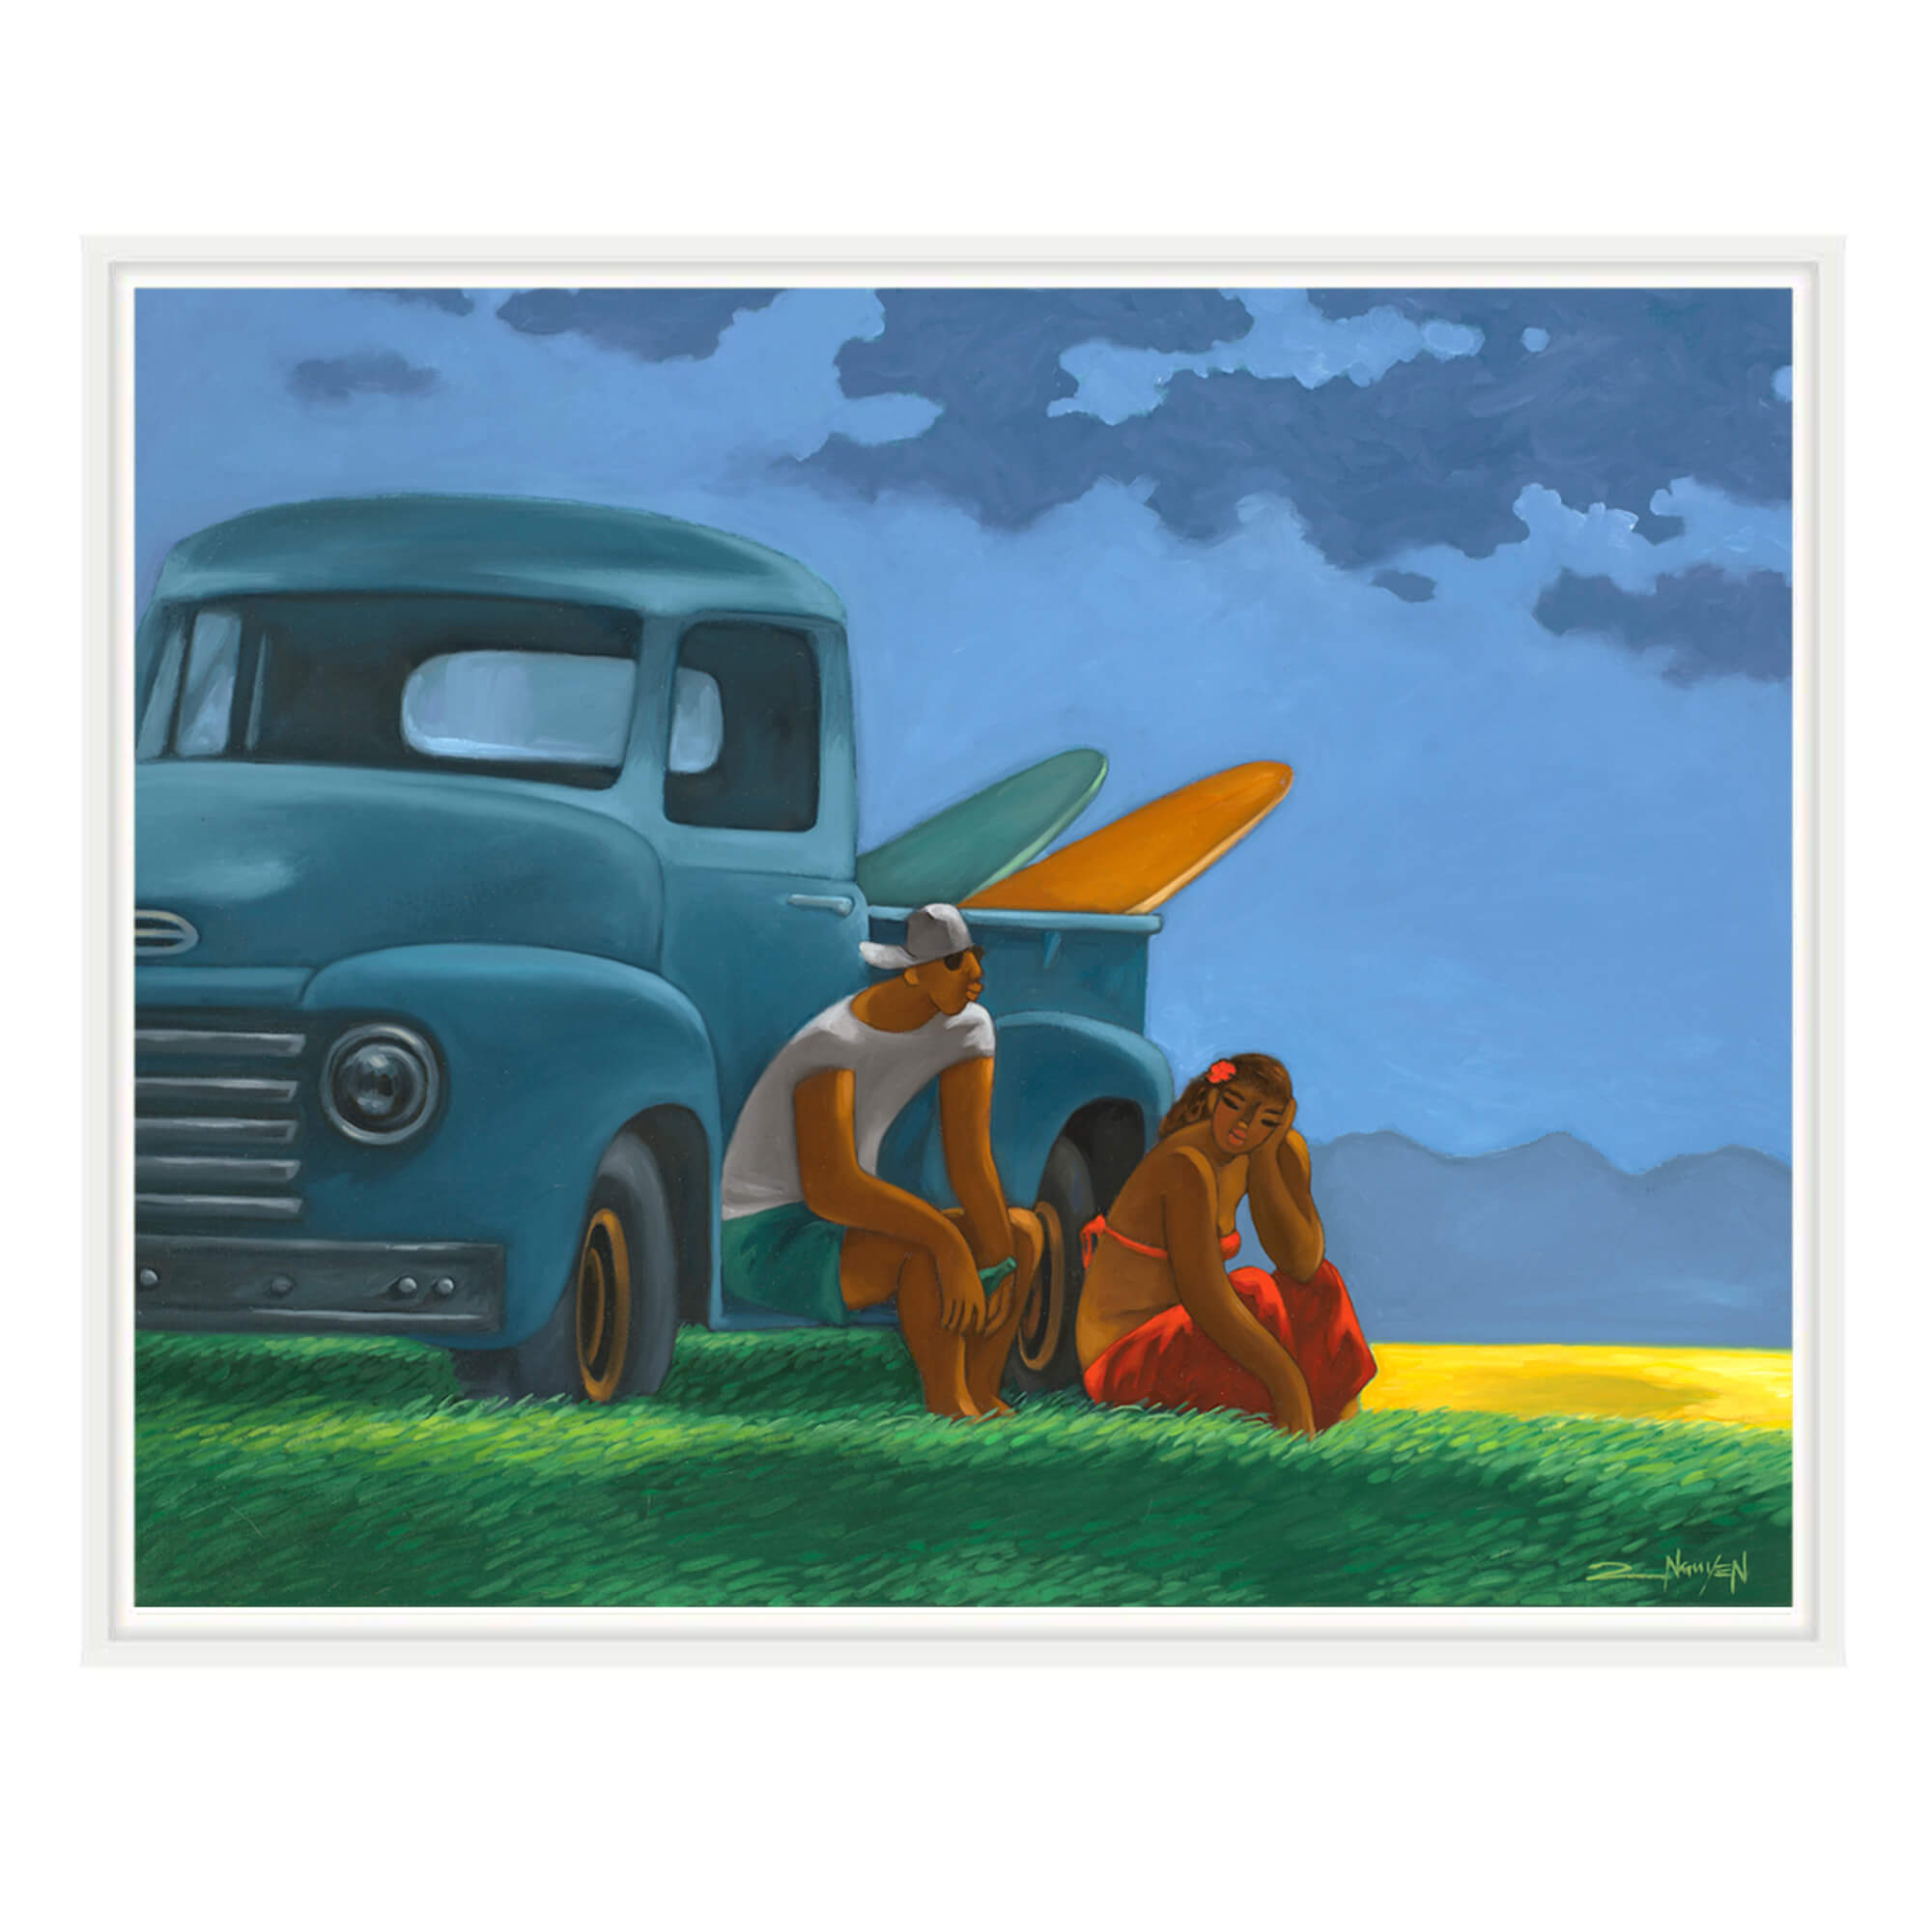 Framed canvas art print of sitting on the green field by their vintage Chevrolet truck by Hawaii artist Tim Nguyen